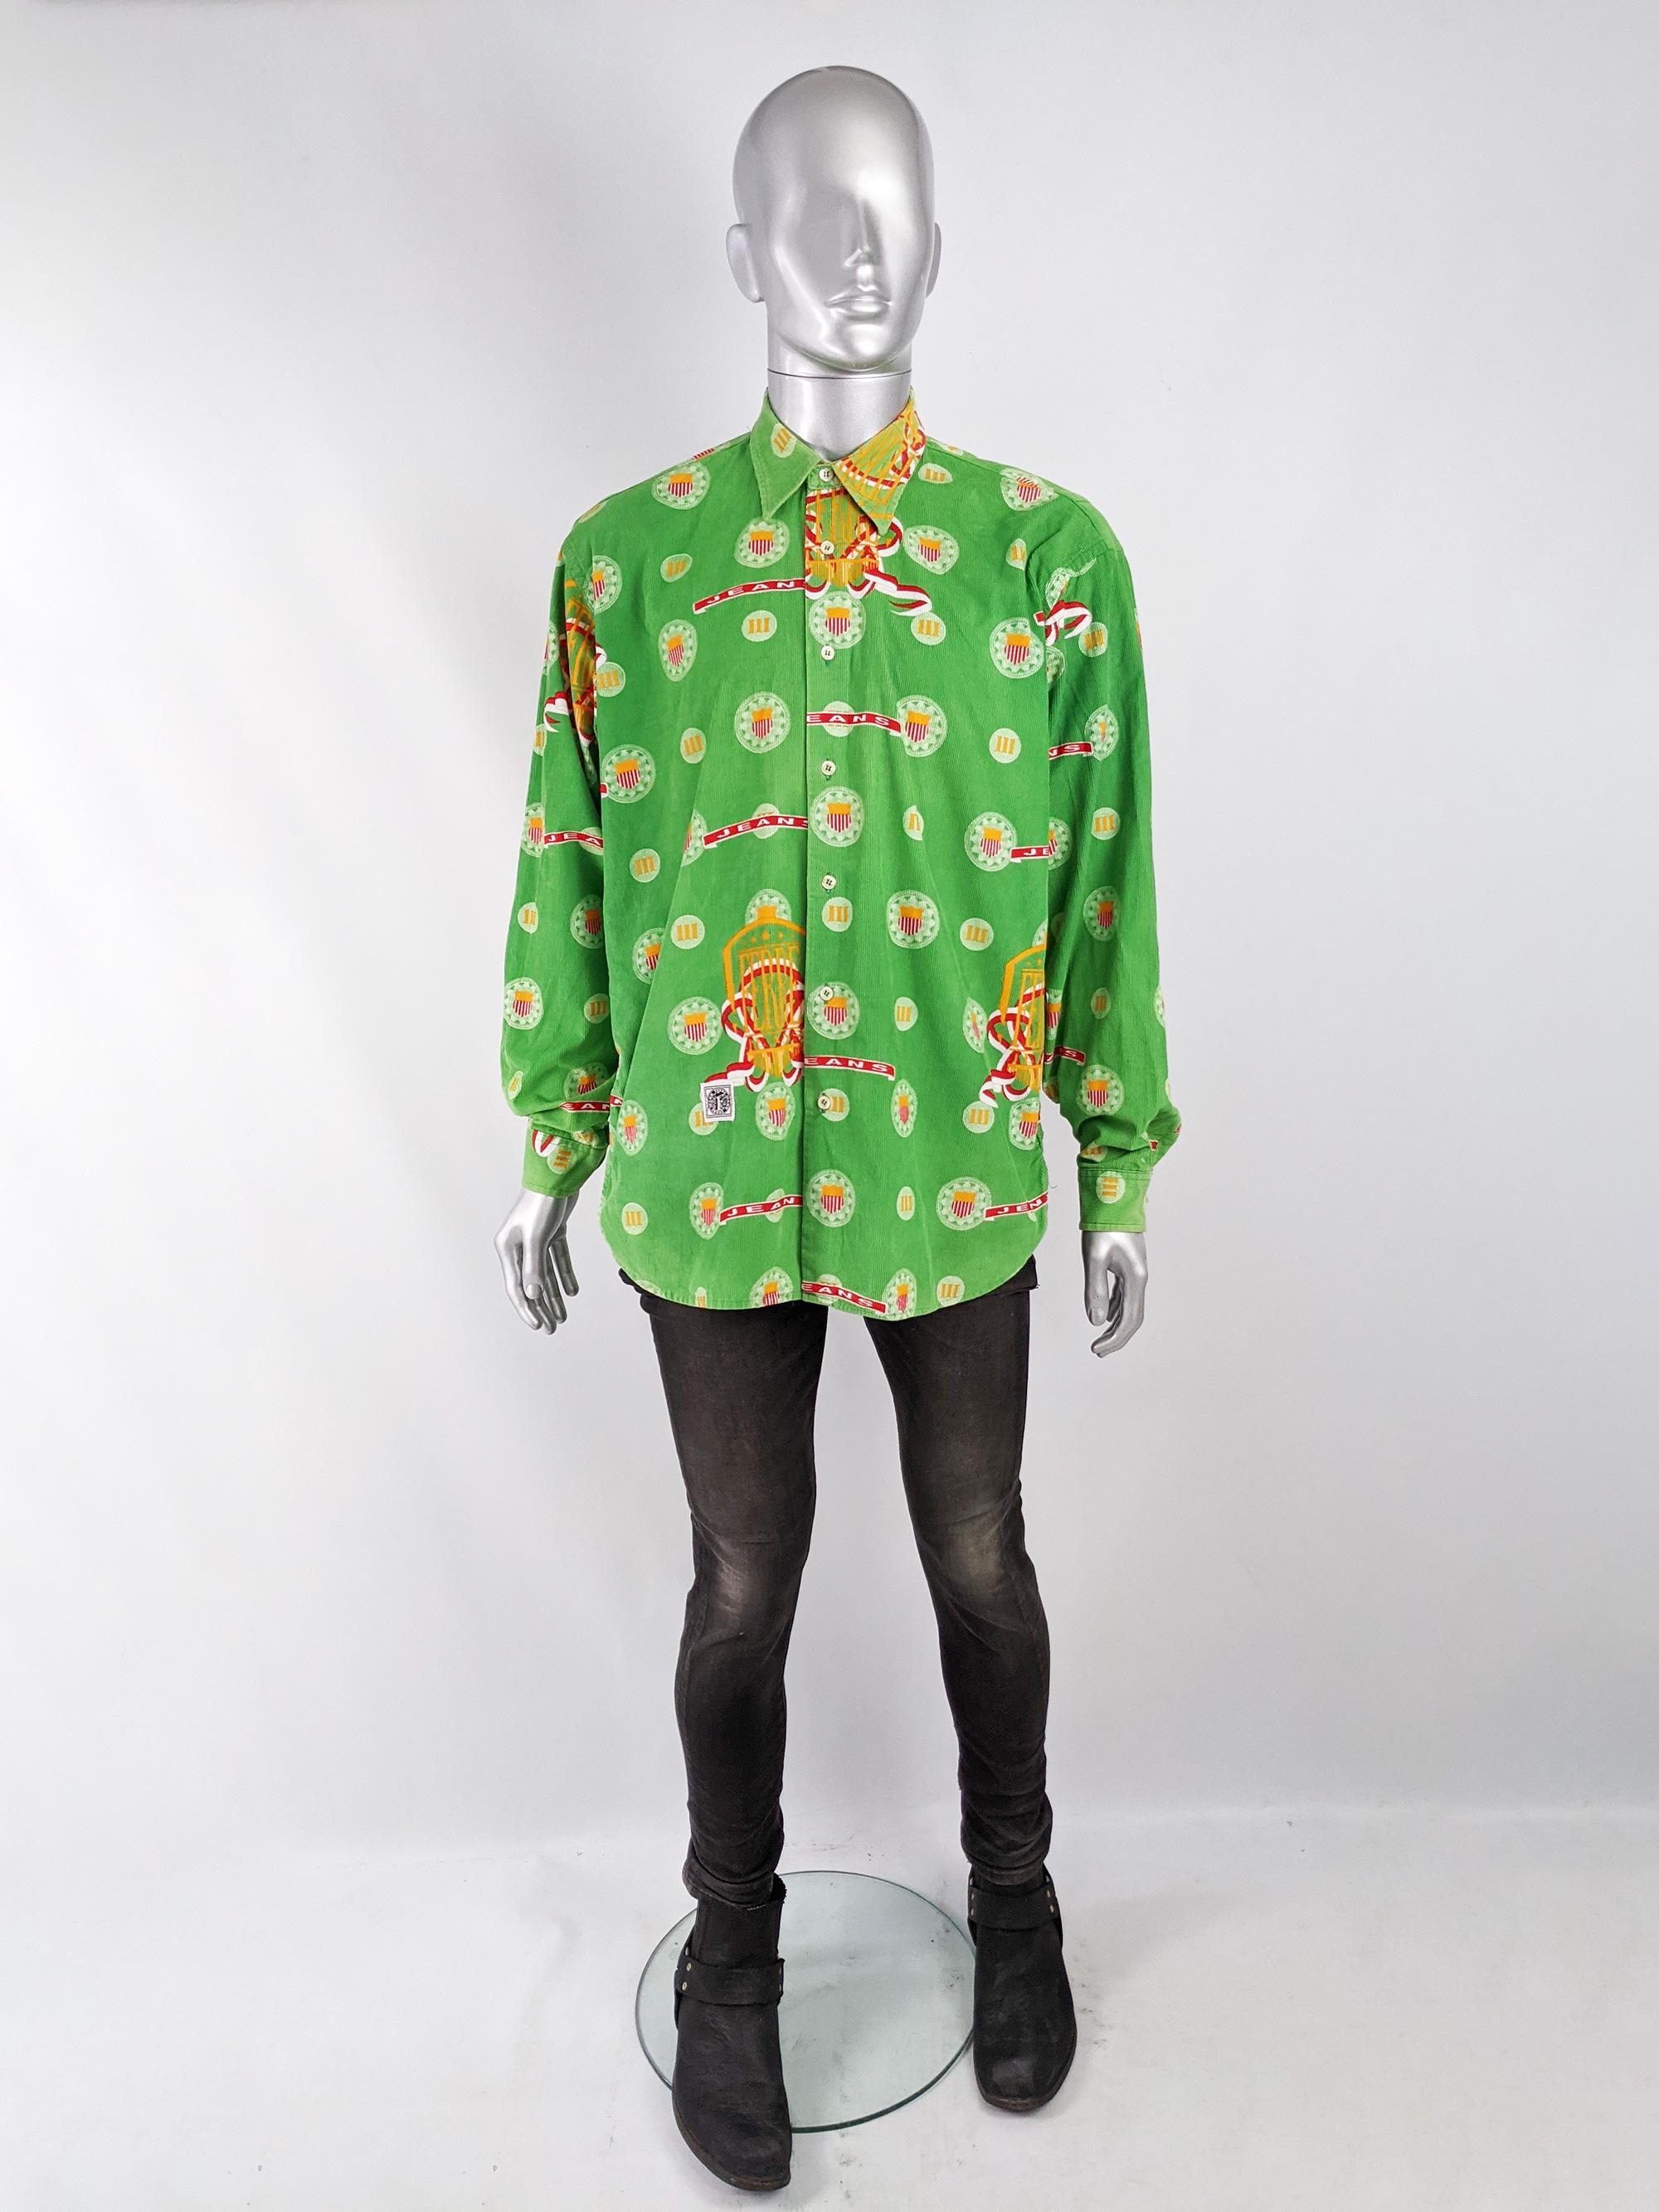 An amazing vintage mens long sleeve shirt by luxury Italian fashion designer and creative director at Dior in the 90s, Gianfranco Ferré. In a bold green needlecord corduroy fabric with an oversized cut and bright spellout pattern throughout. 

Size: